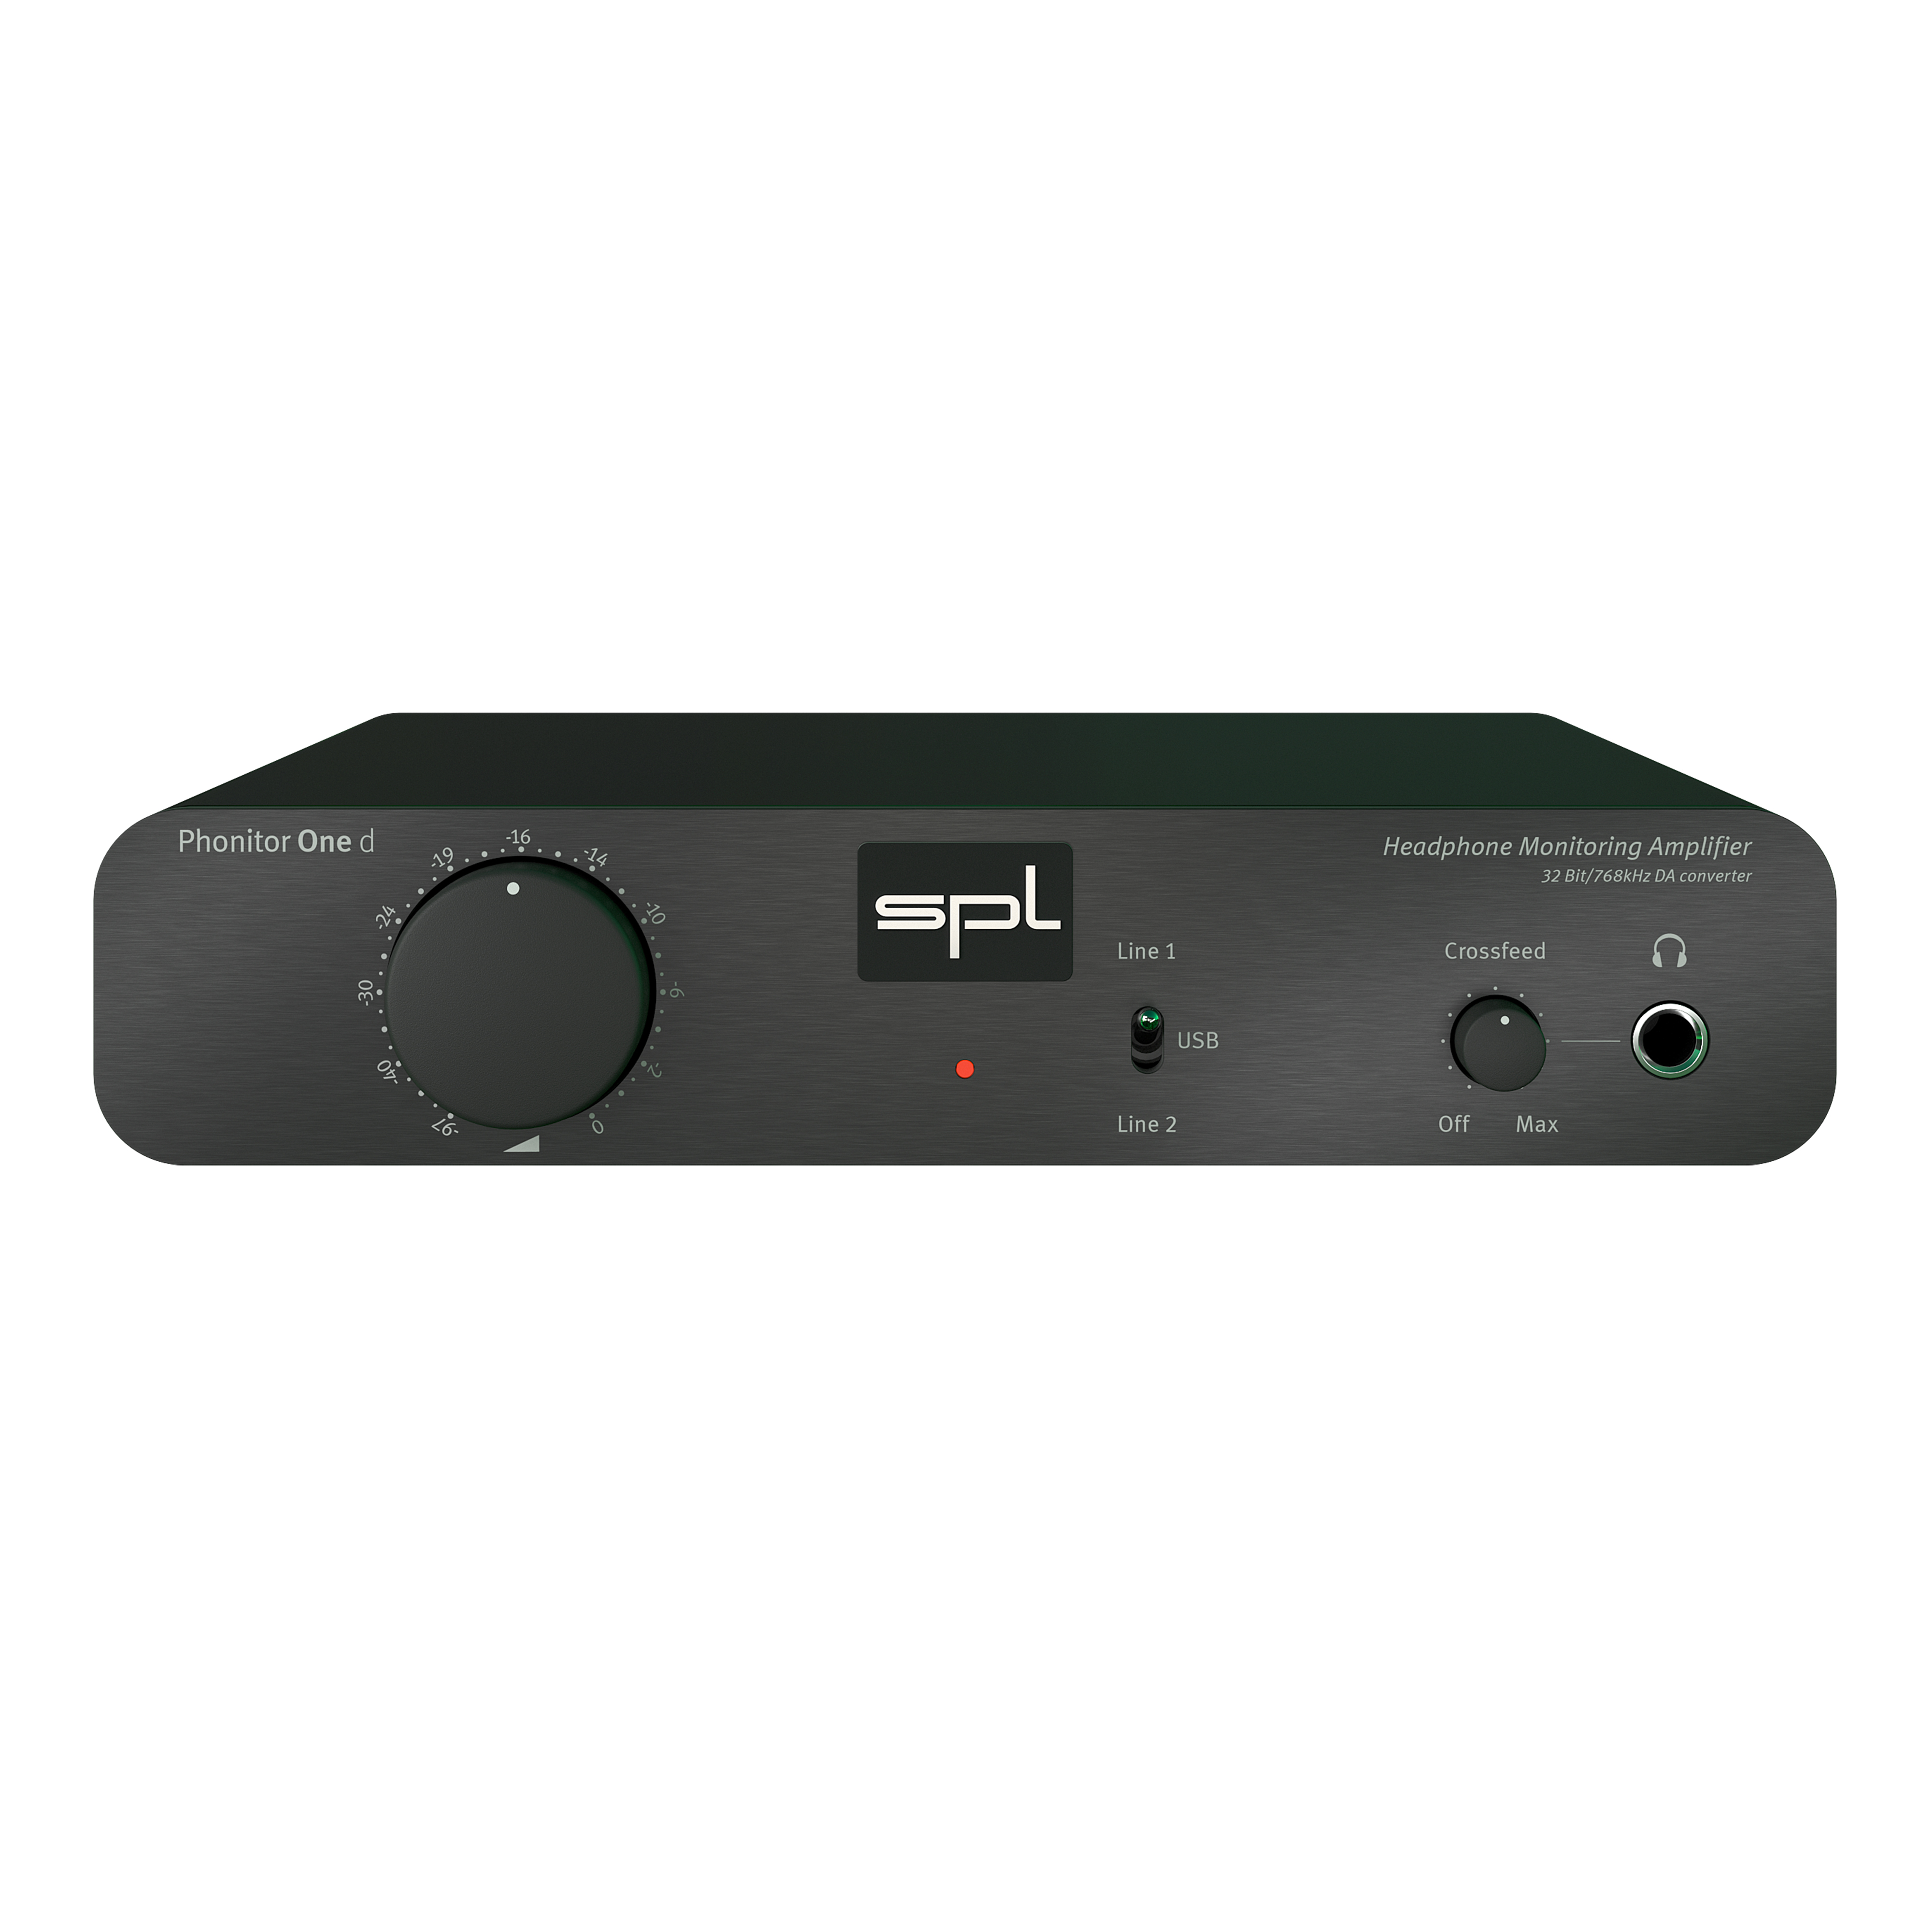 SPL Phonitor One d Headphone Monitoring amp